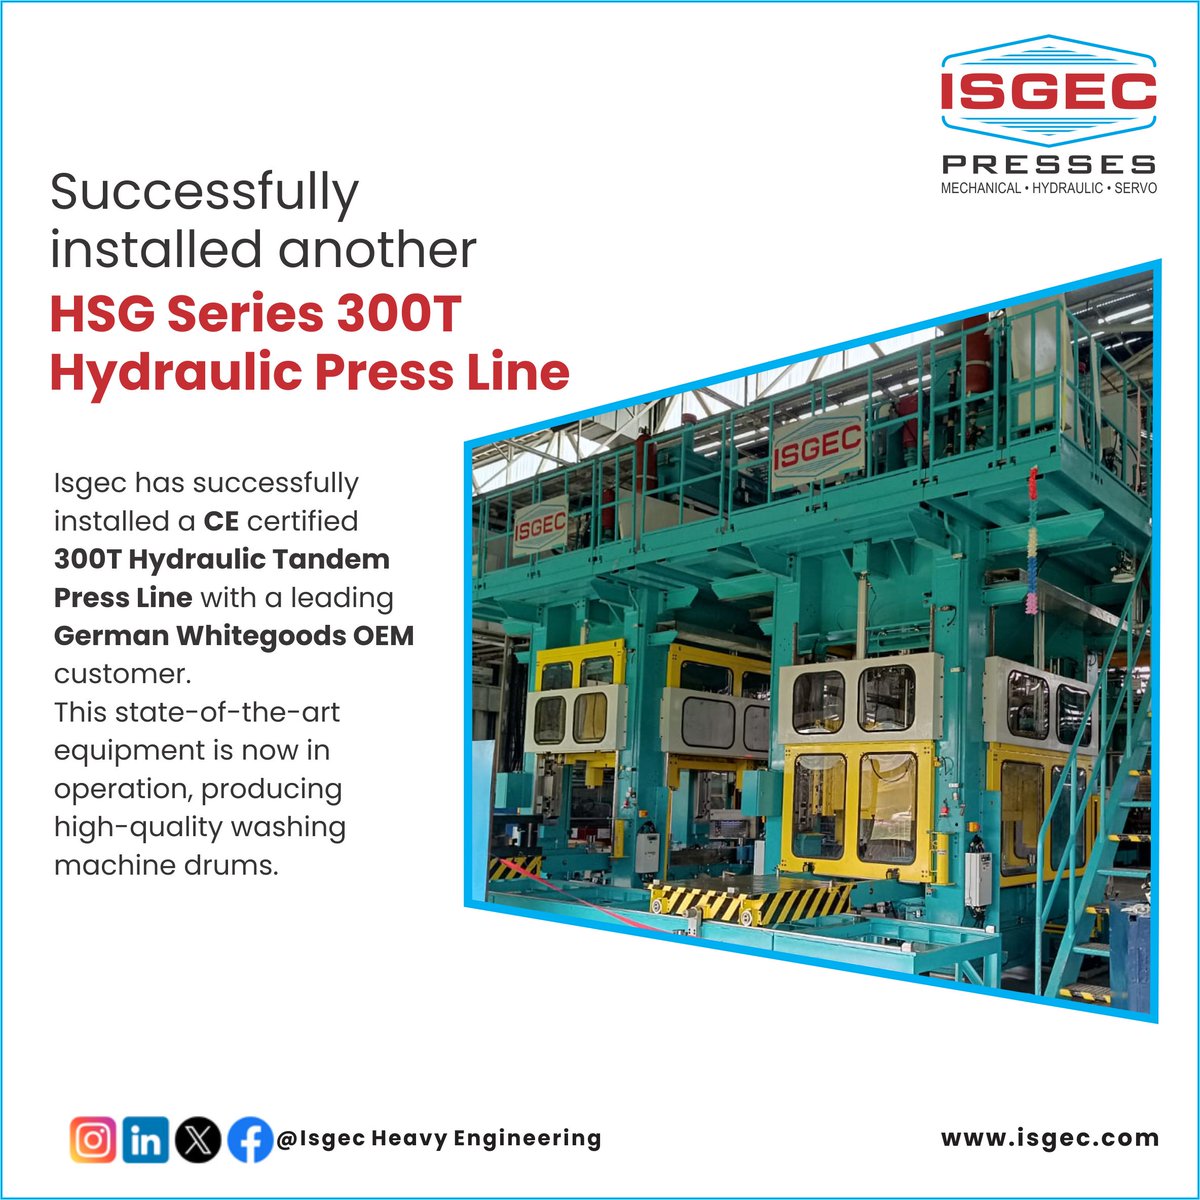 We are pleased to announce that Isgec has successfully installed a CE Certified 300T Hydraulic Tandem Press Line with a leading German Whitegoods OEM Customer to manufacture high-quality washing machine drums.

#IsgecPresses

1/4